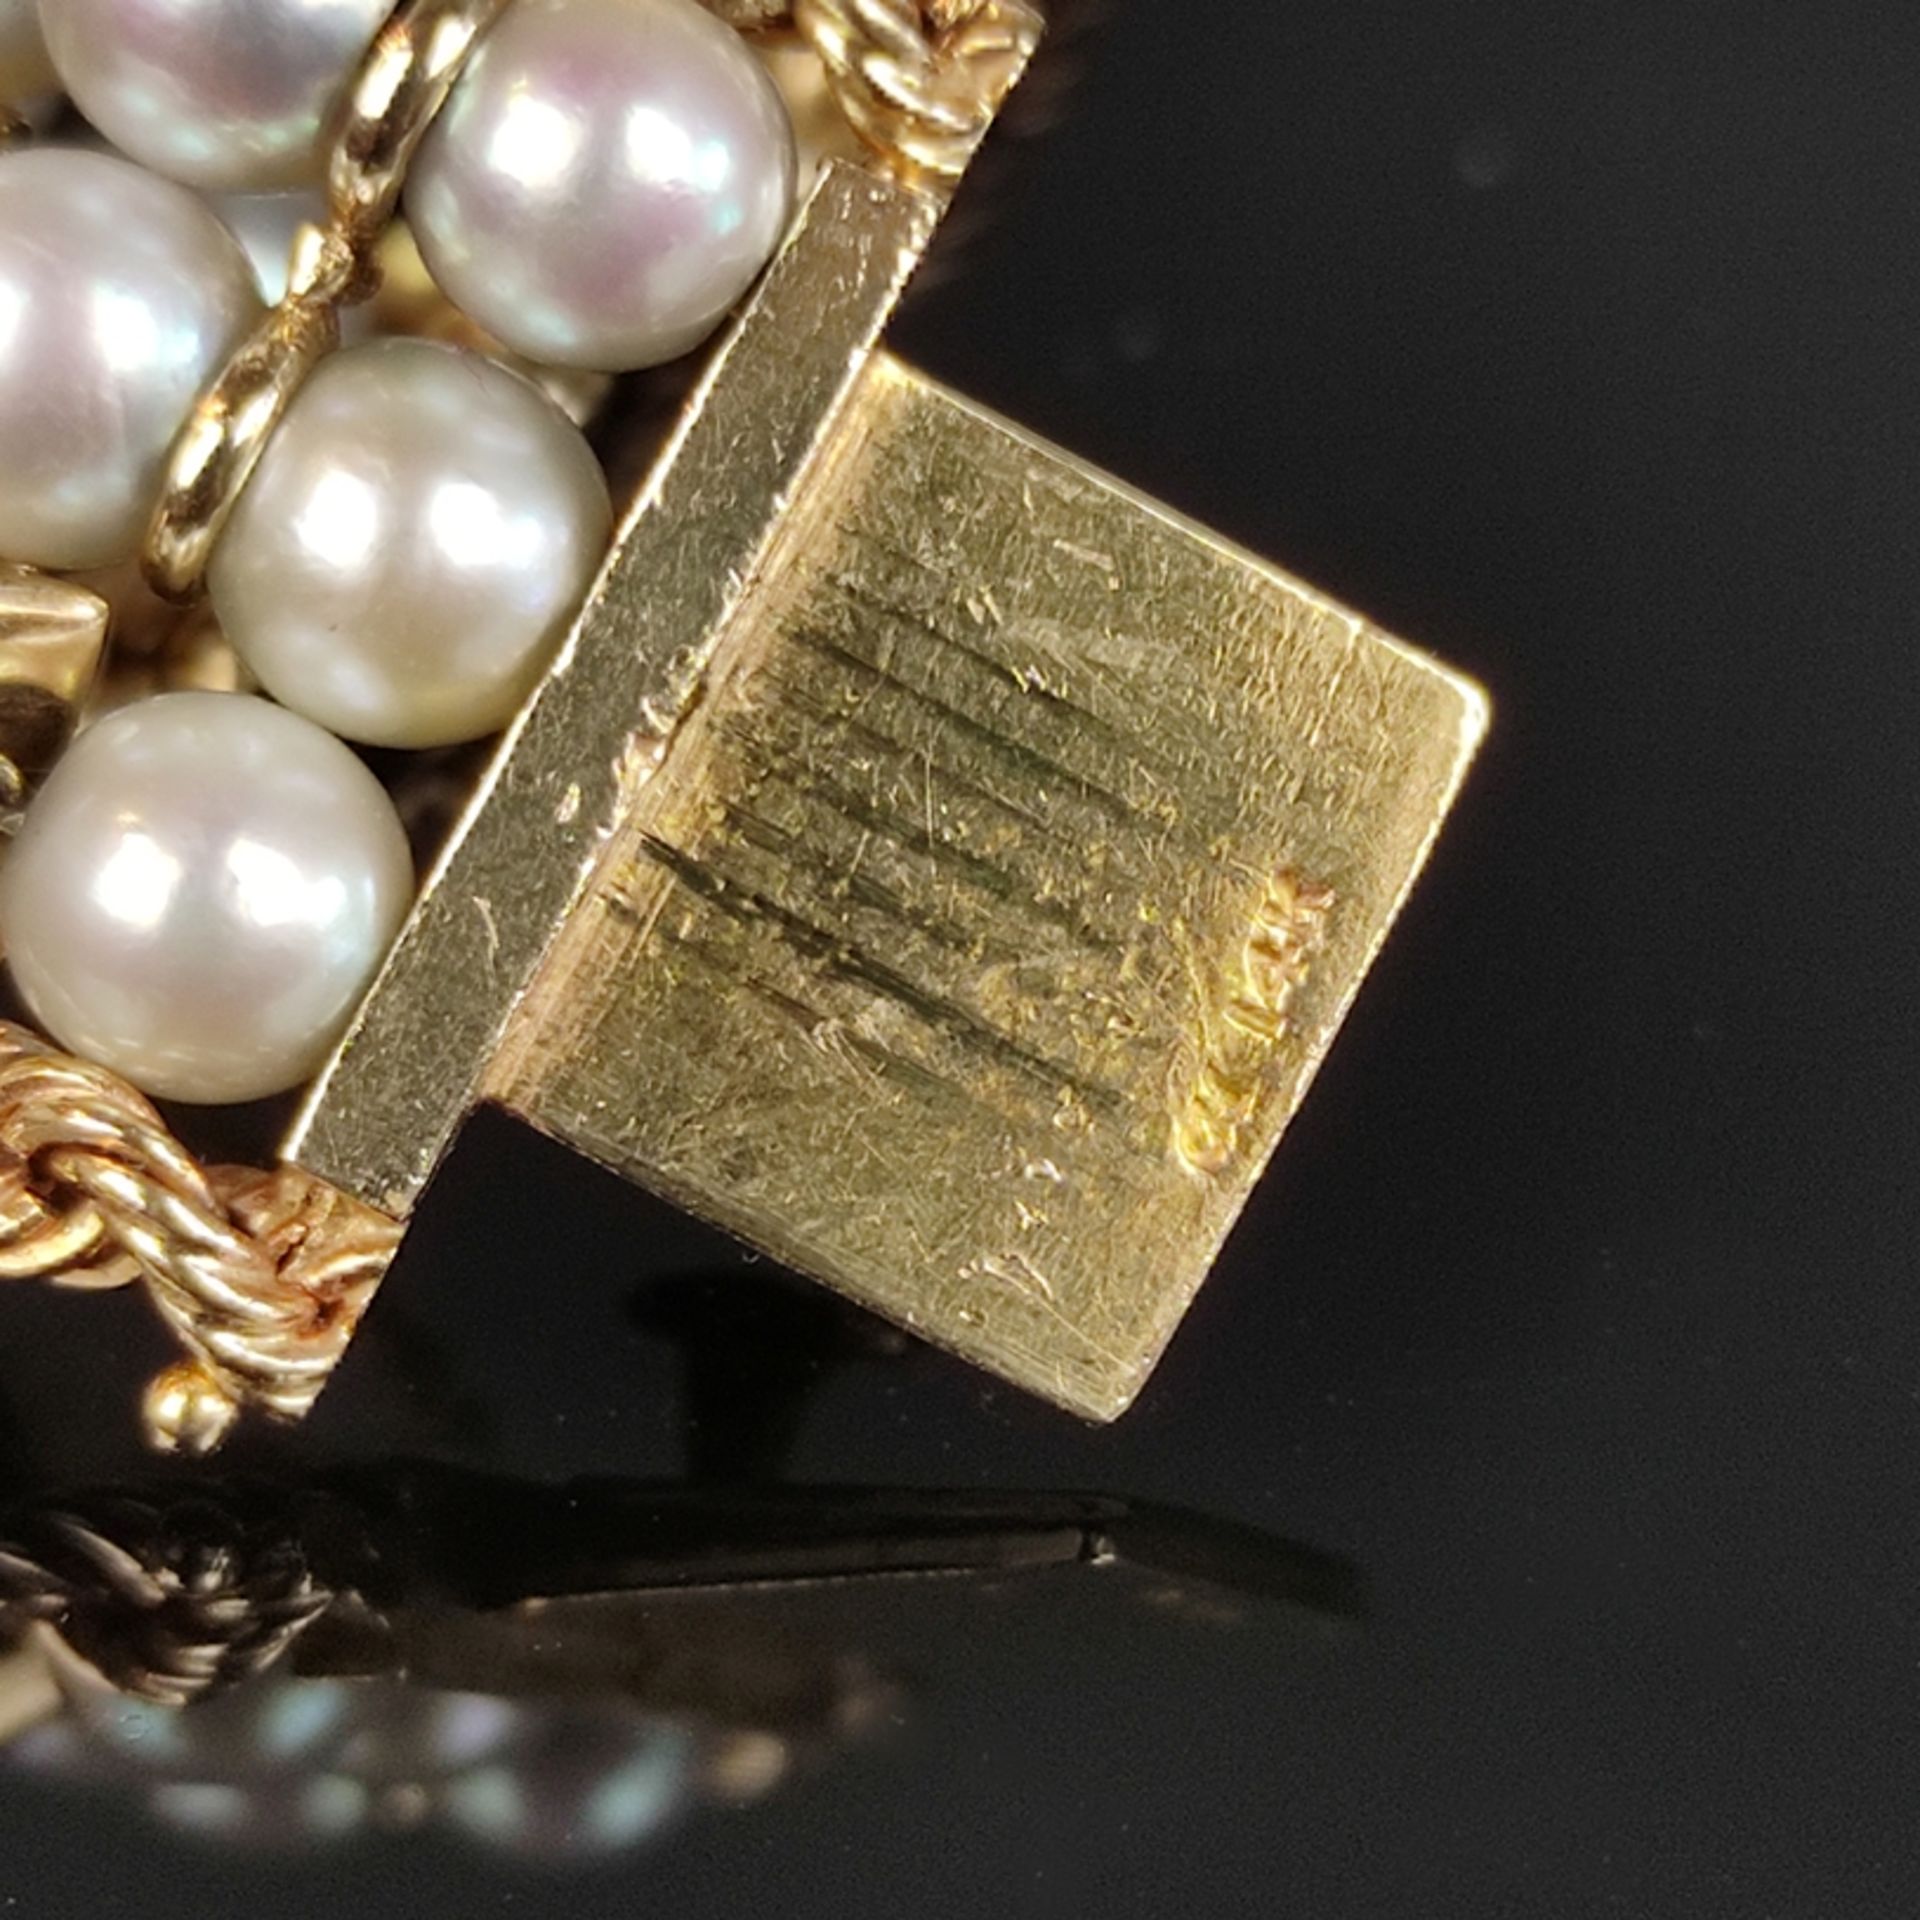 Pearl gold bracelet, 585/14K yellow gold, total weight 51.1g, set with 71 pearls, cord edges and de - Image 3 of 3